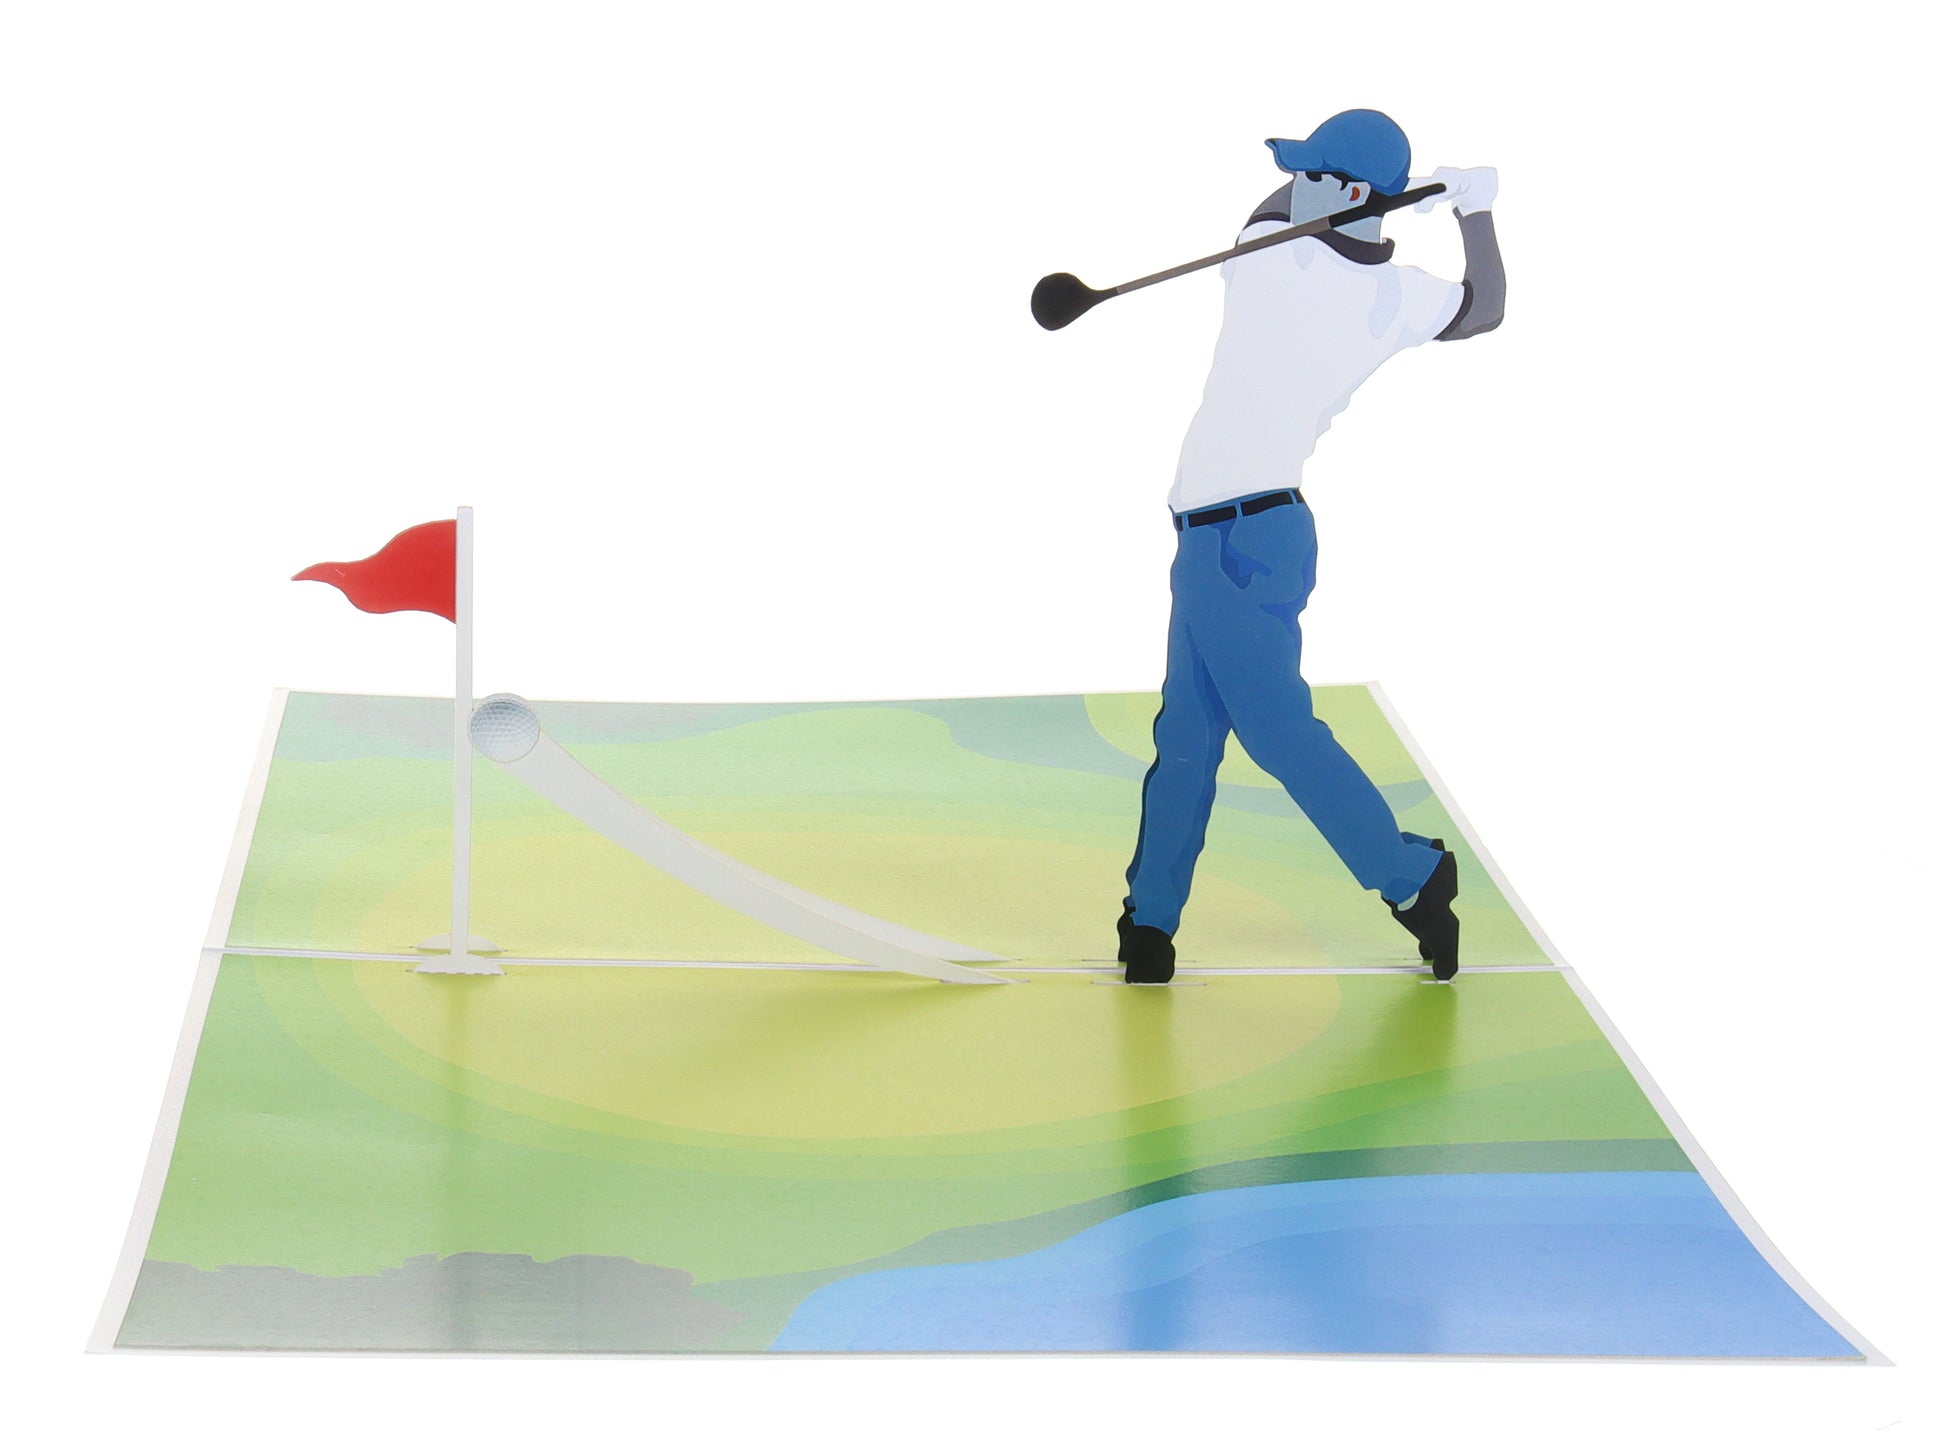 Awesome Man Golf Card 3D Pop Up Greeting Card - Congrats - Congratulations - Father's Day - Get Well - iGifts And Cards